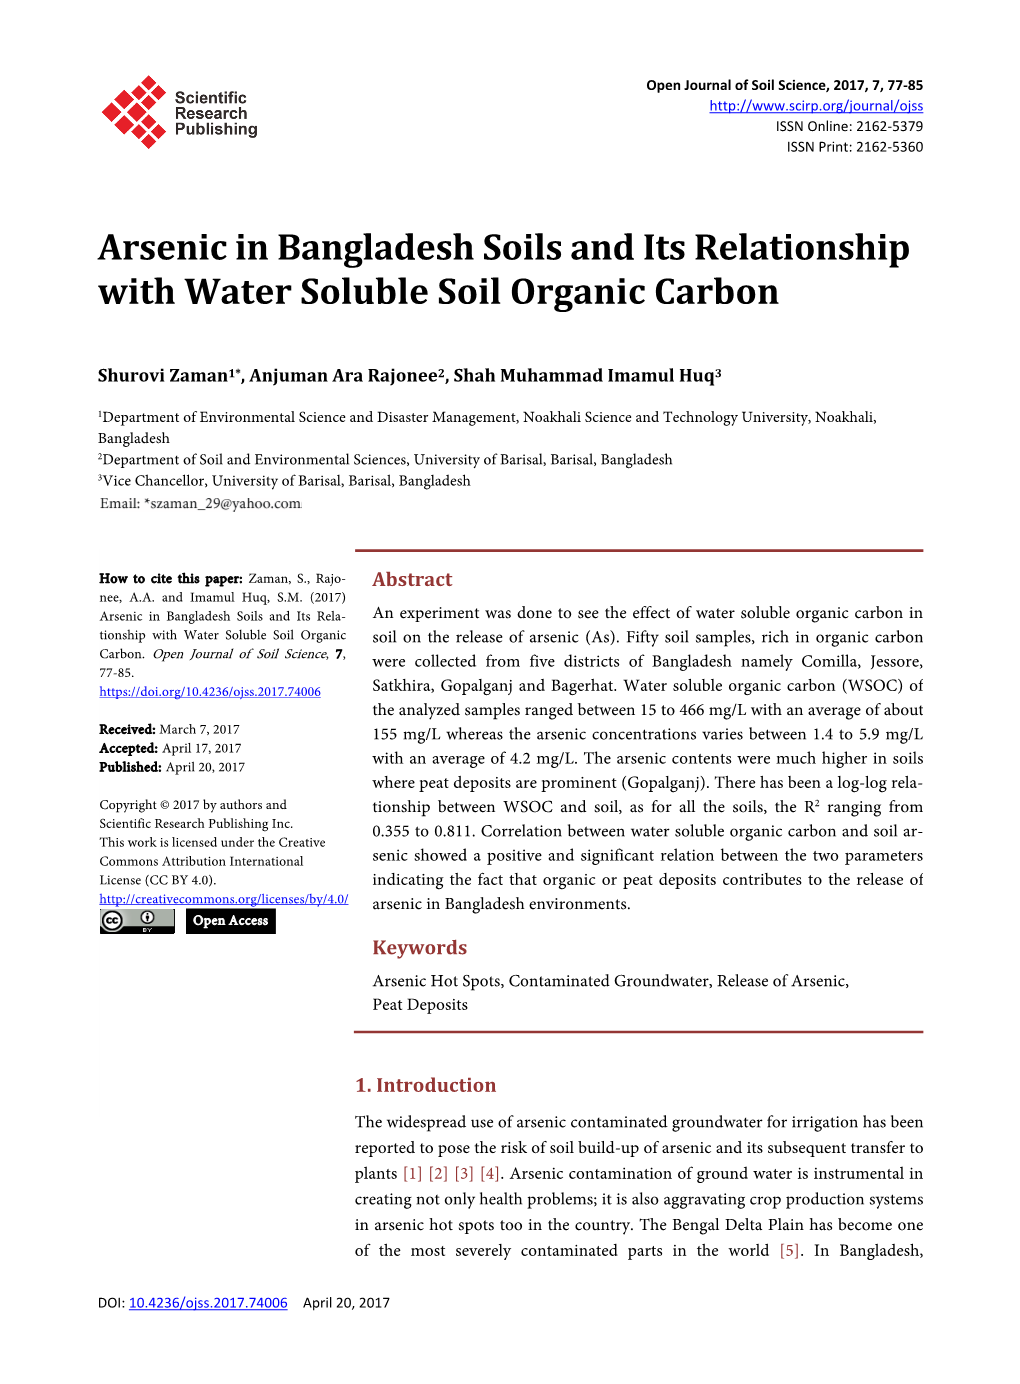 Arsenic in Bangladesh Soils and Its Relationship with Water Soluble Soil Organic Carbon